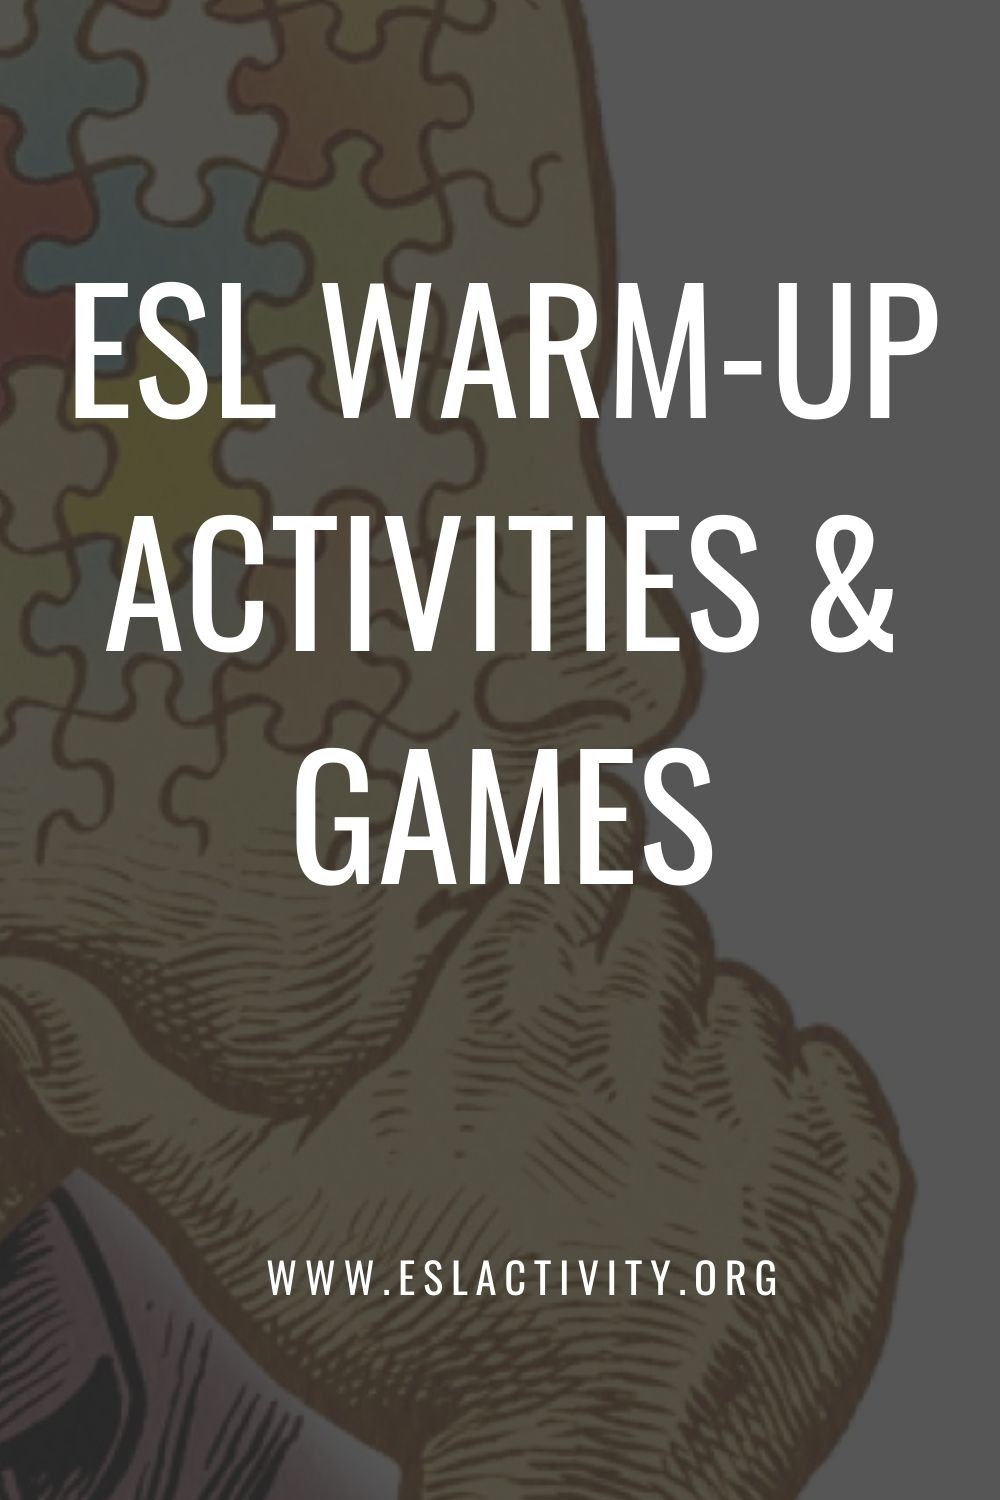 TEFL Warm Ups and Activities for Adults - Business English Resources